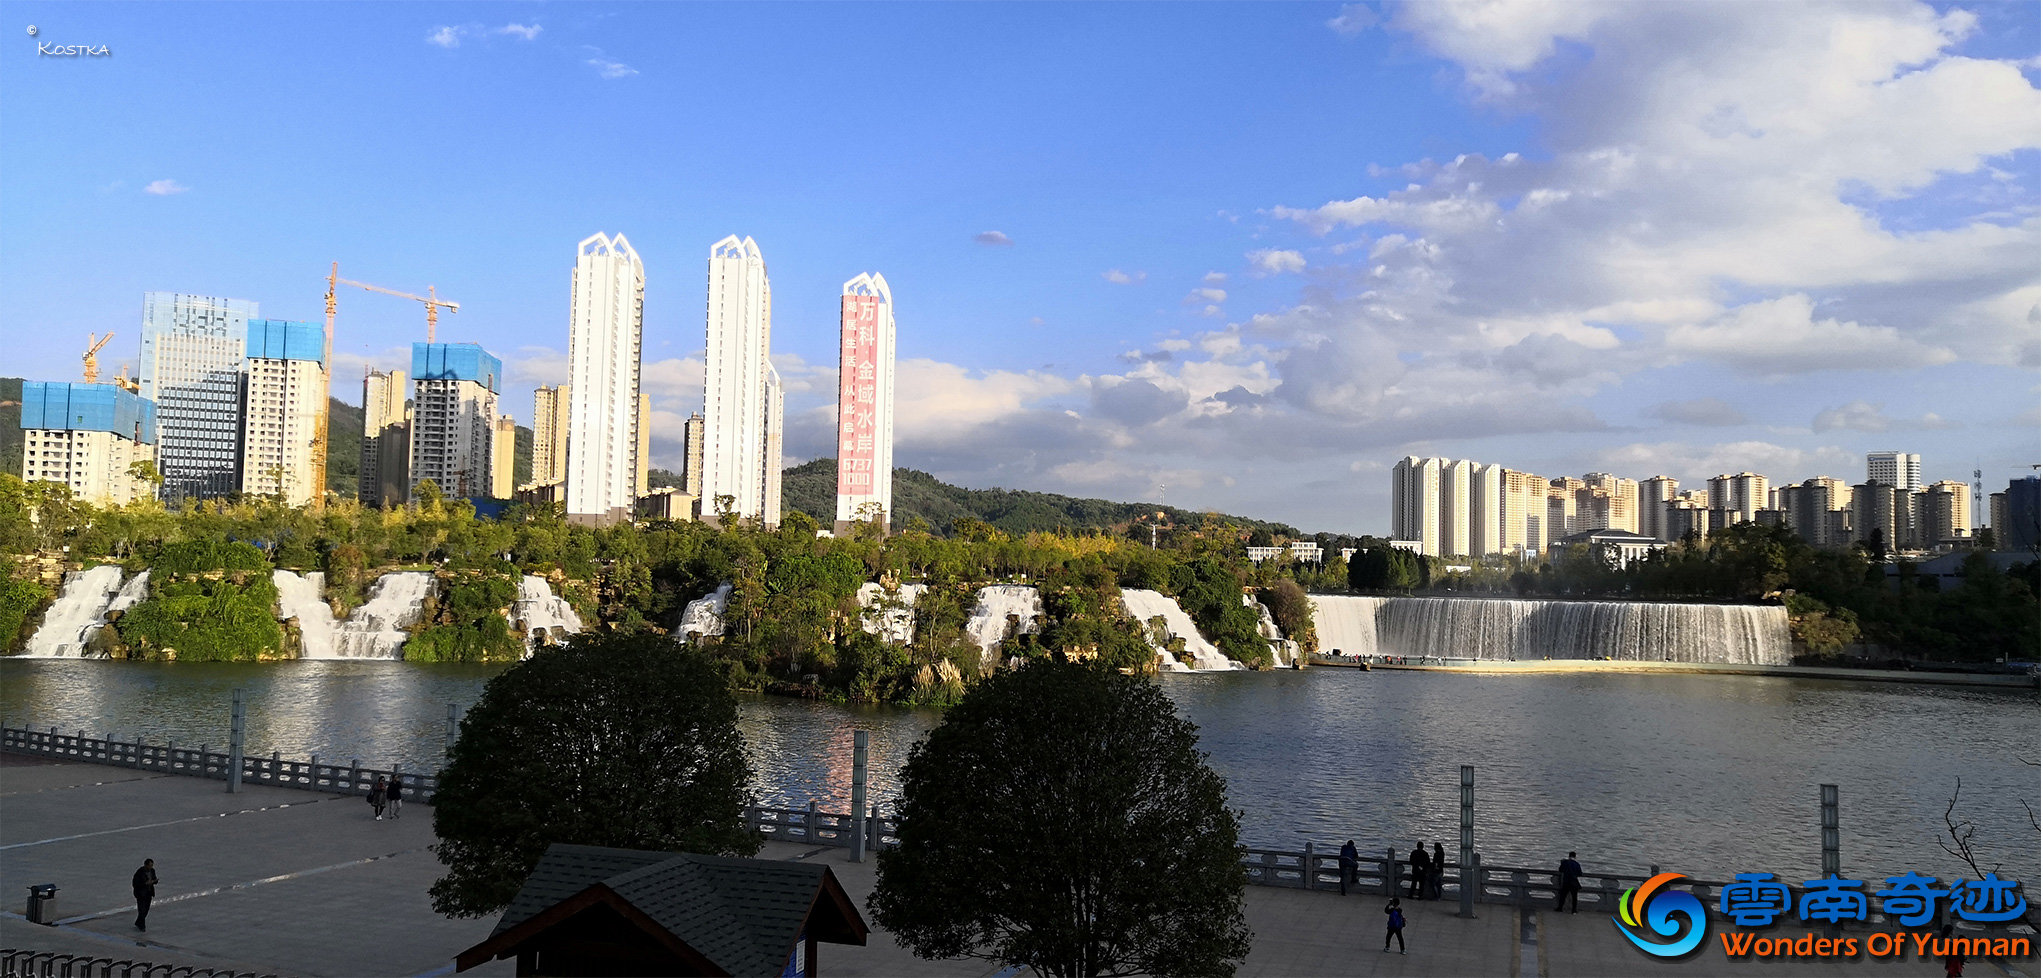 View from the west side platform over the lower lake of Waterfall Park with the 400-meter cascades and the natural waterfalls in the background people walking alongside the lake looking over the water watching the birds on the island 